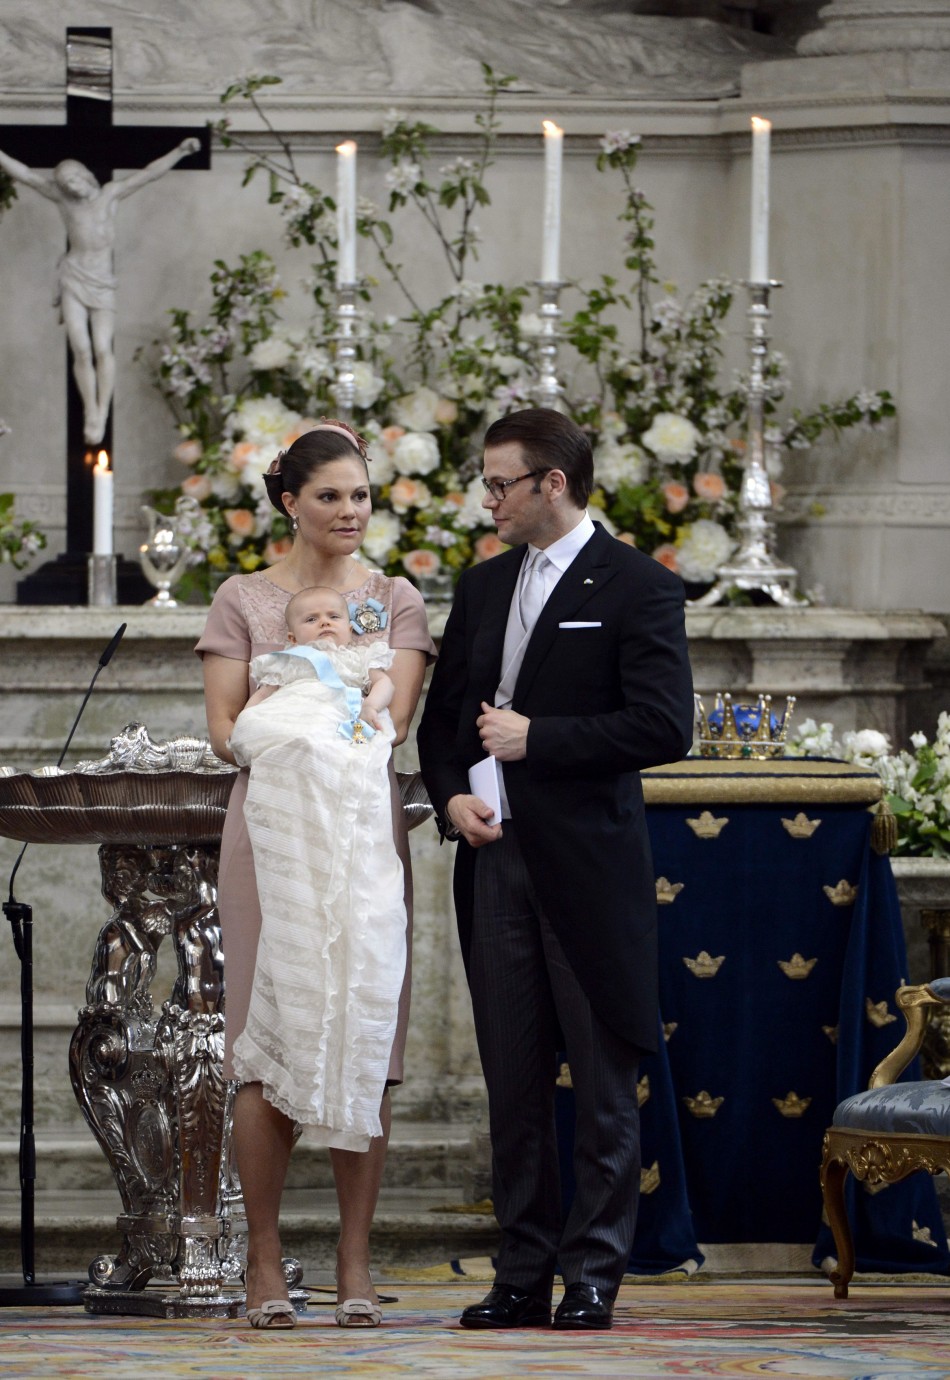 Swedens Crown Princess Victoria holds Princess Estelle as she stands with Prince Daniel after the christening ceremony, held at the Royal Chapel in Stockholm